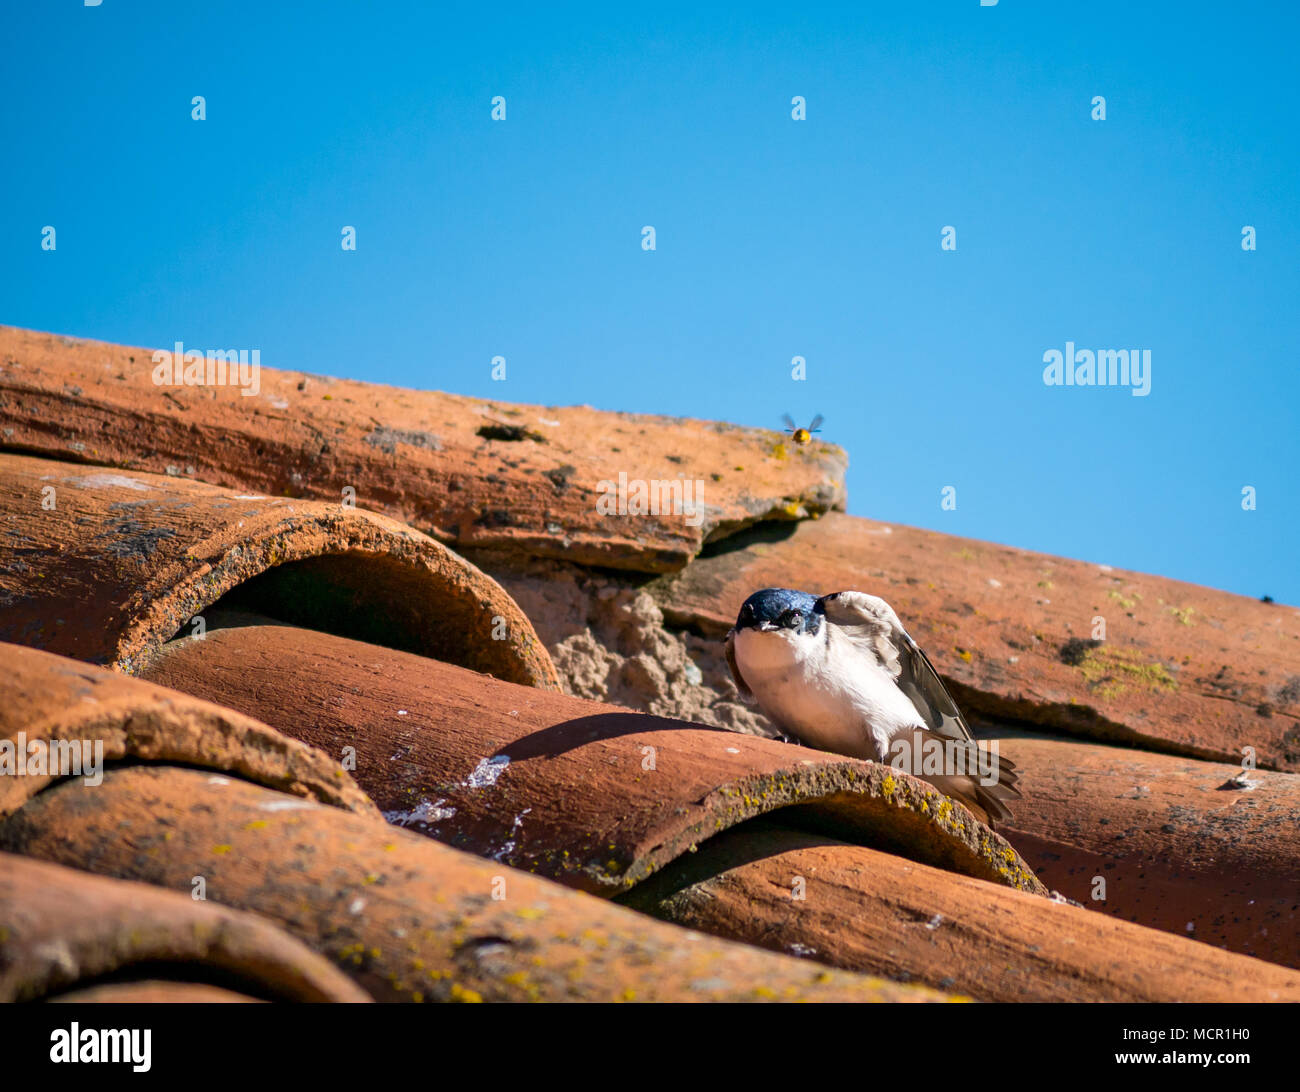 Chilean swallow, Tachycineta leucopyga, resting on tiled roof with winged insect flying past, Chile, South America Stock Photo